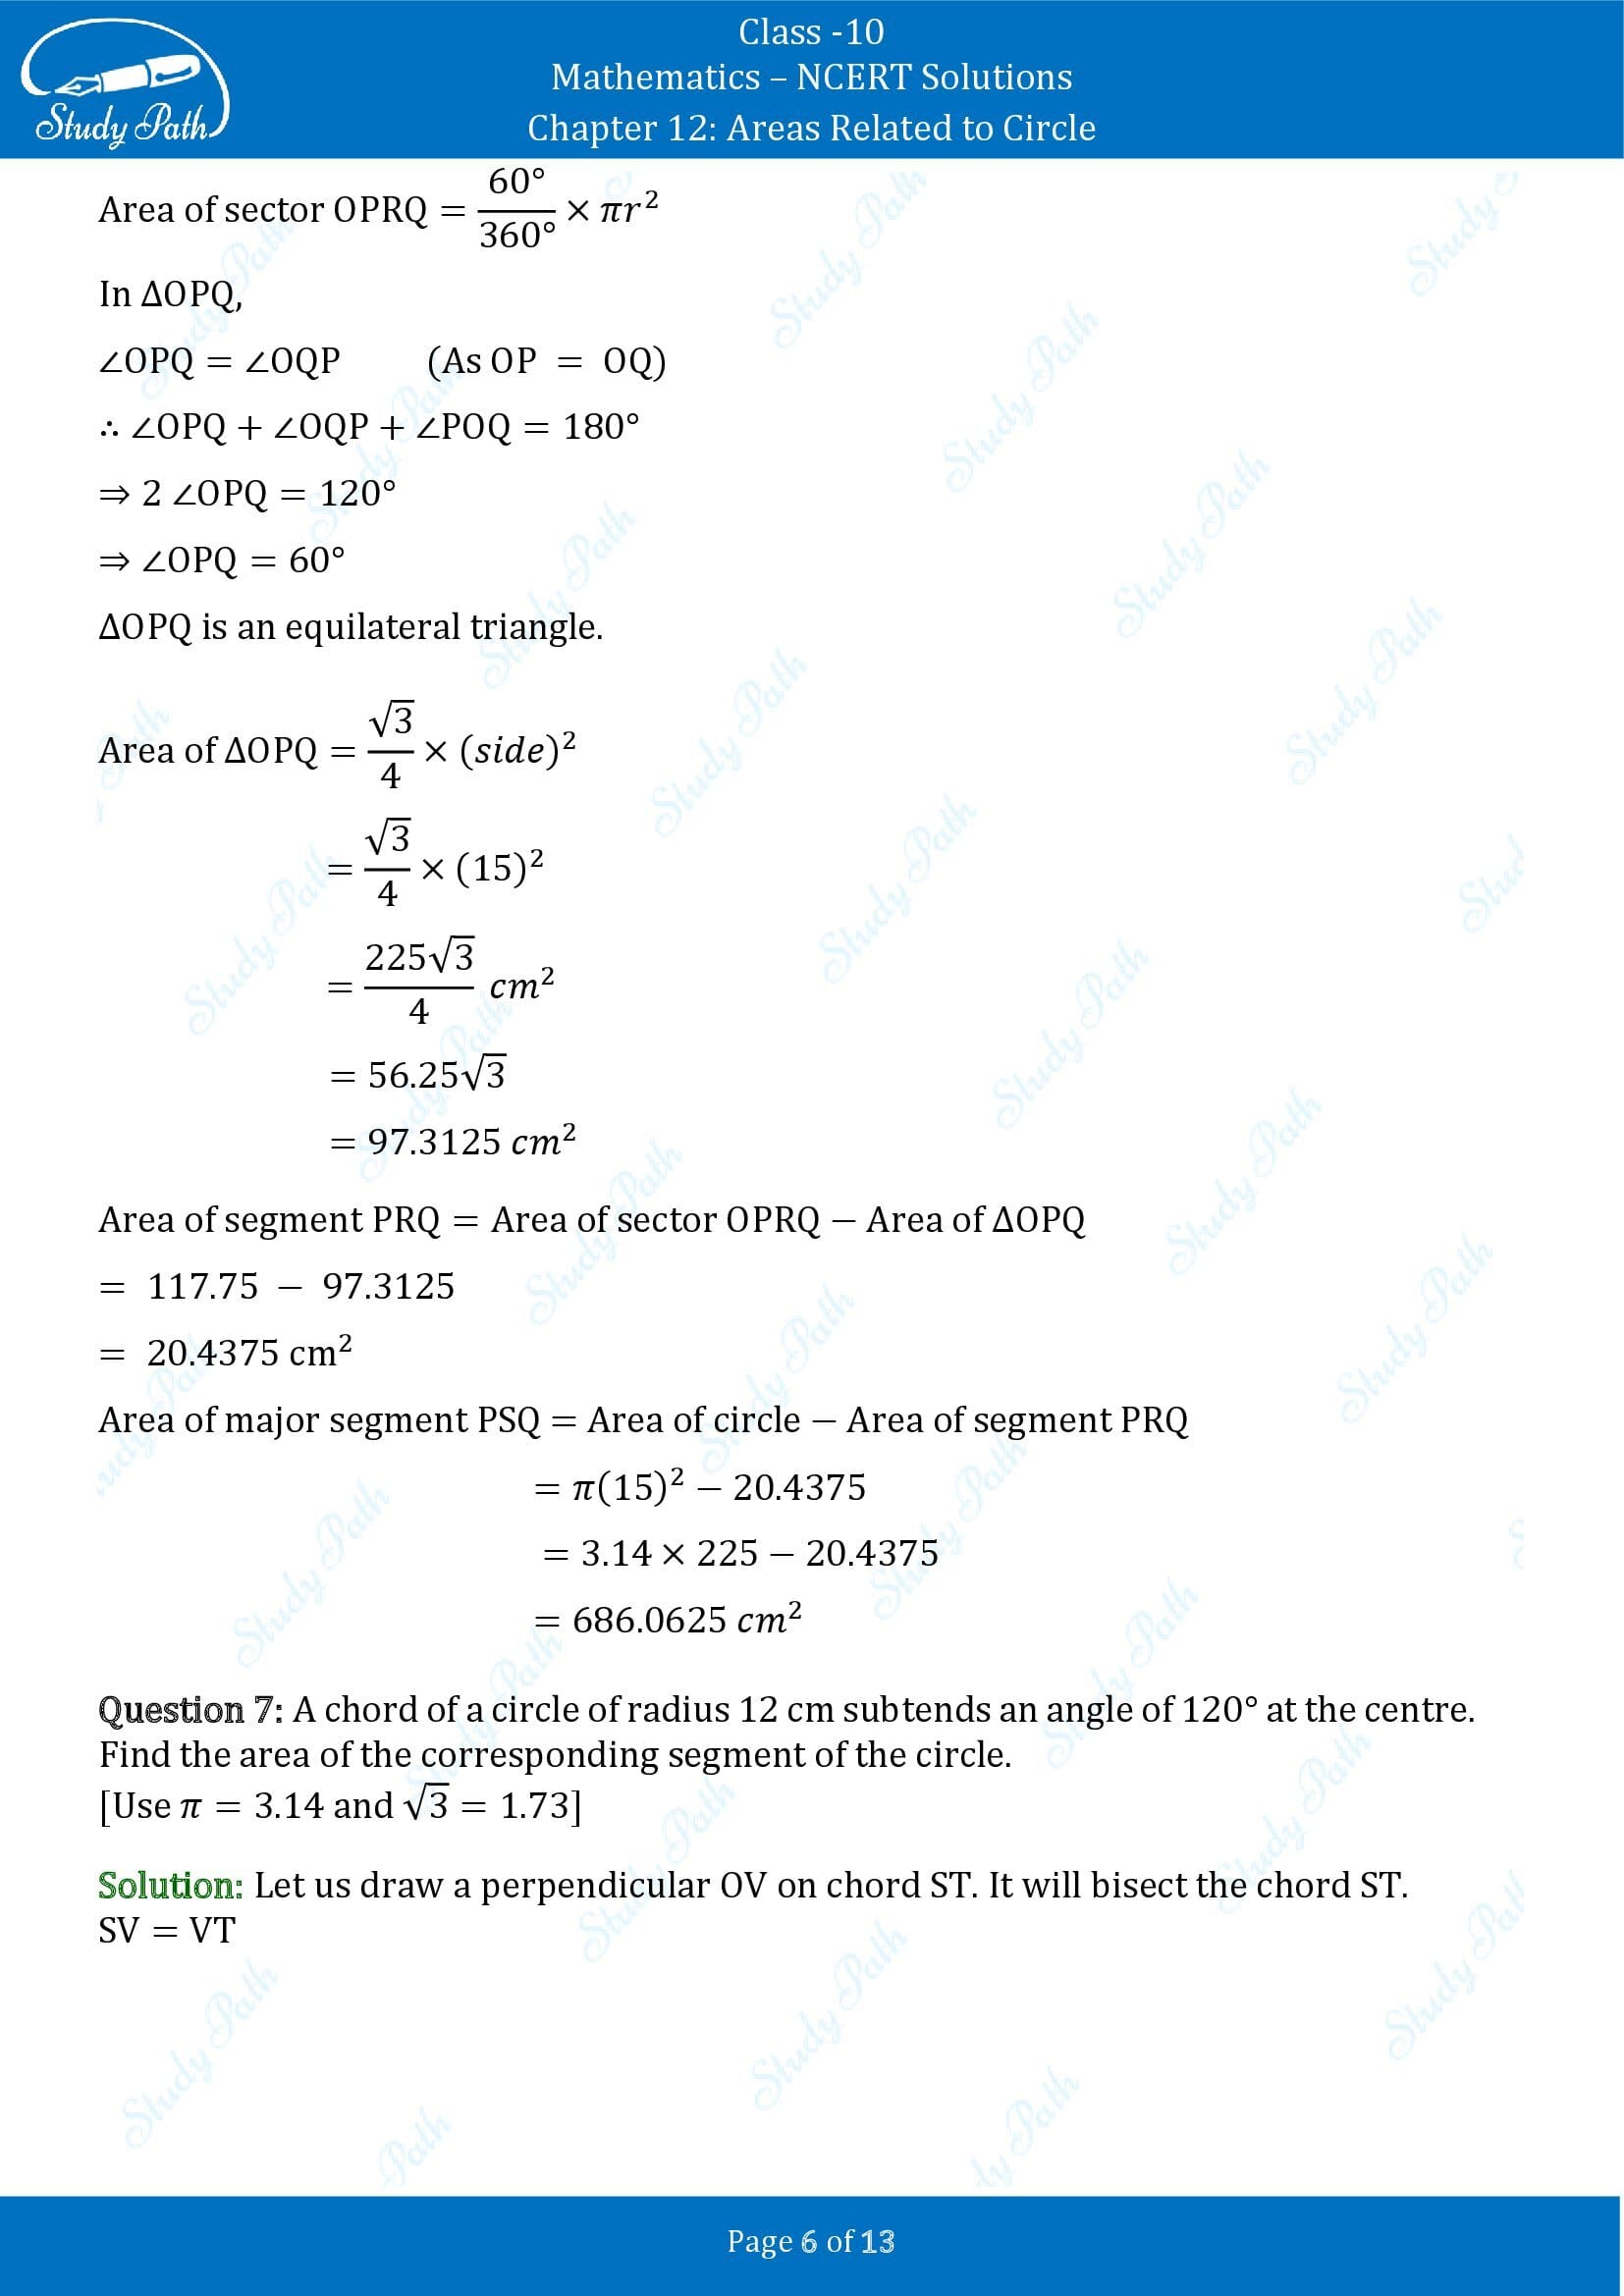 NCERT Solutions for Class 10 Maths Chapter 12 Areas Related to Circles Exercise 12.2 00006